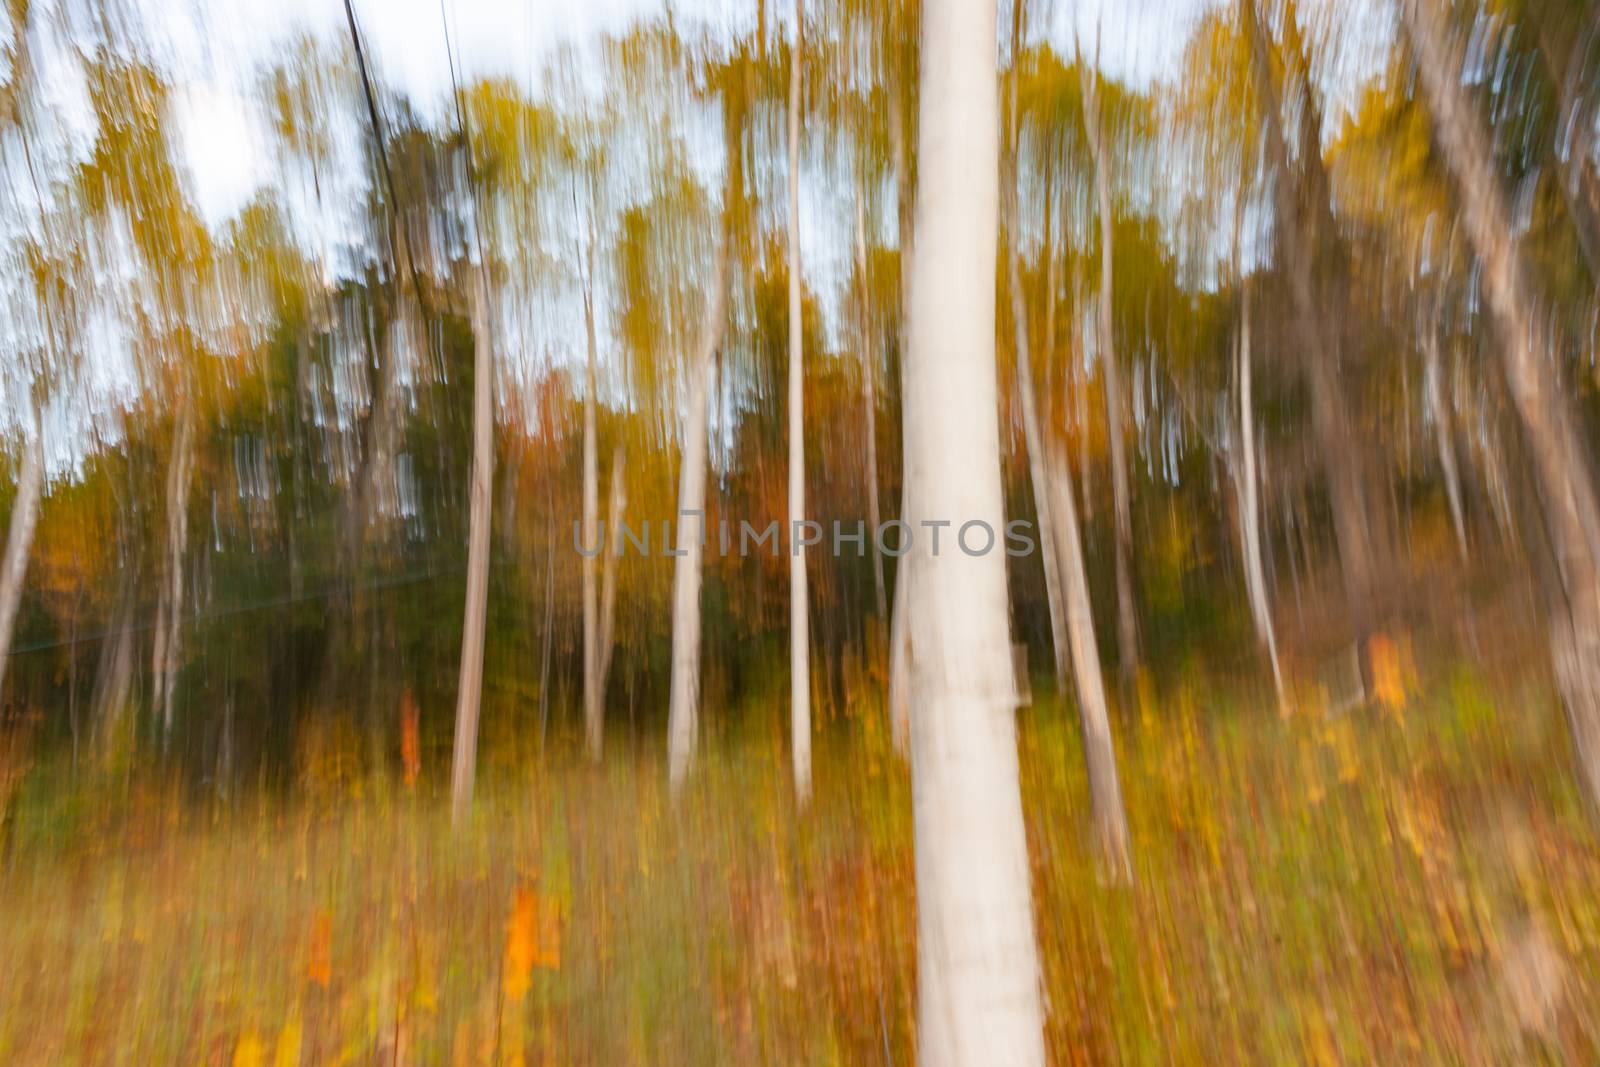 Vertical motion blur of forest impressionism background with strong white tree trunk.